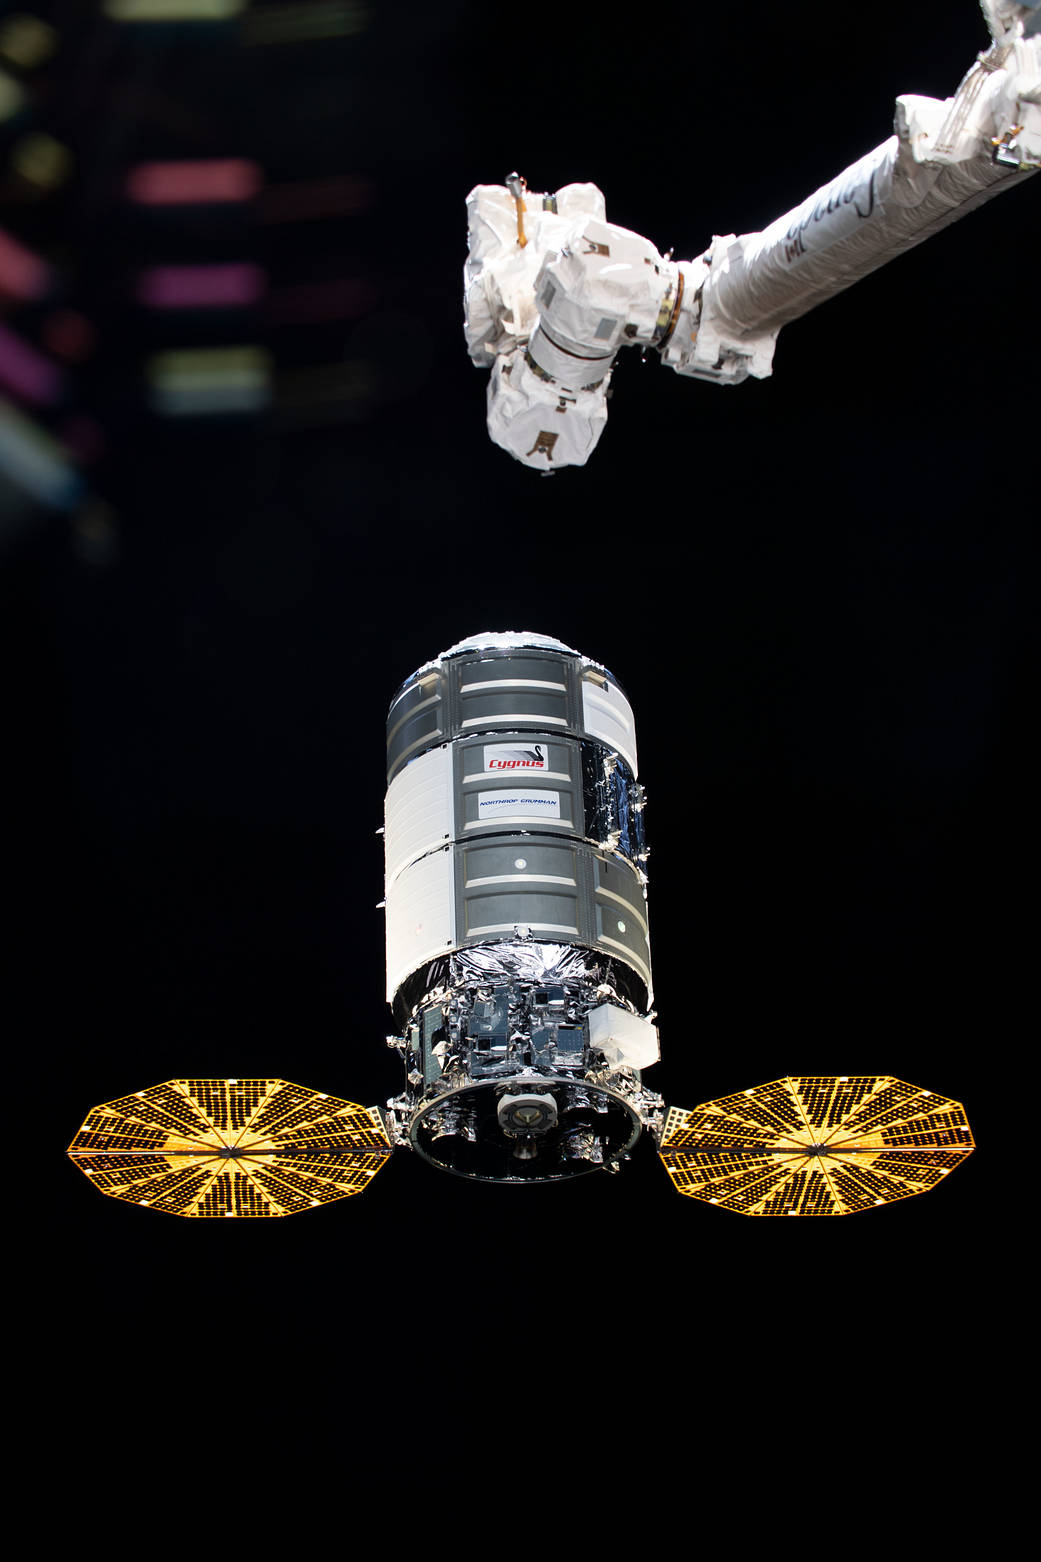 The Cygnus space freighter approaches the space station